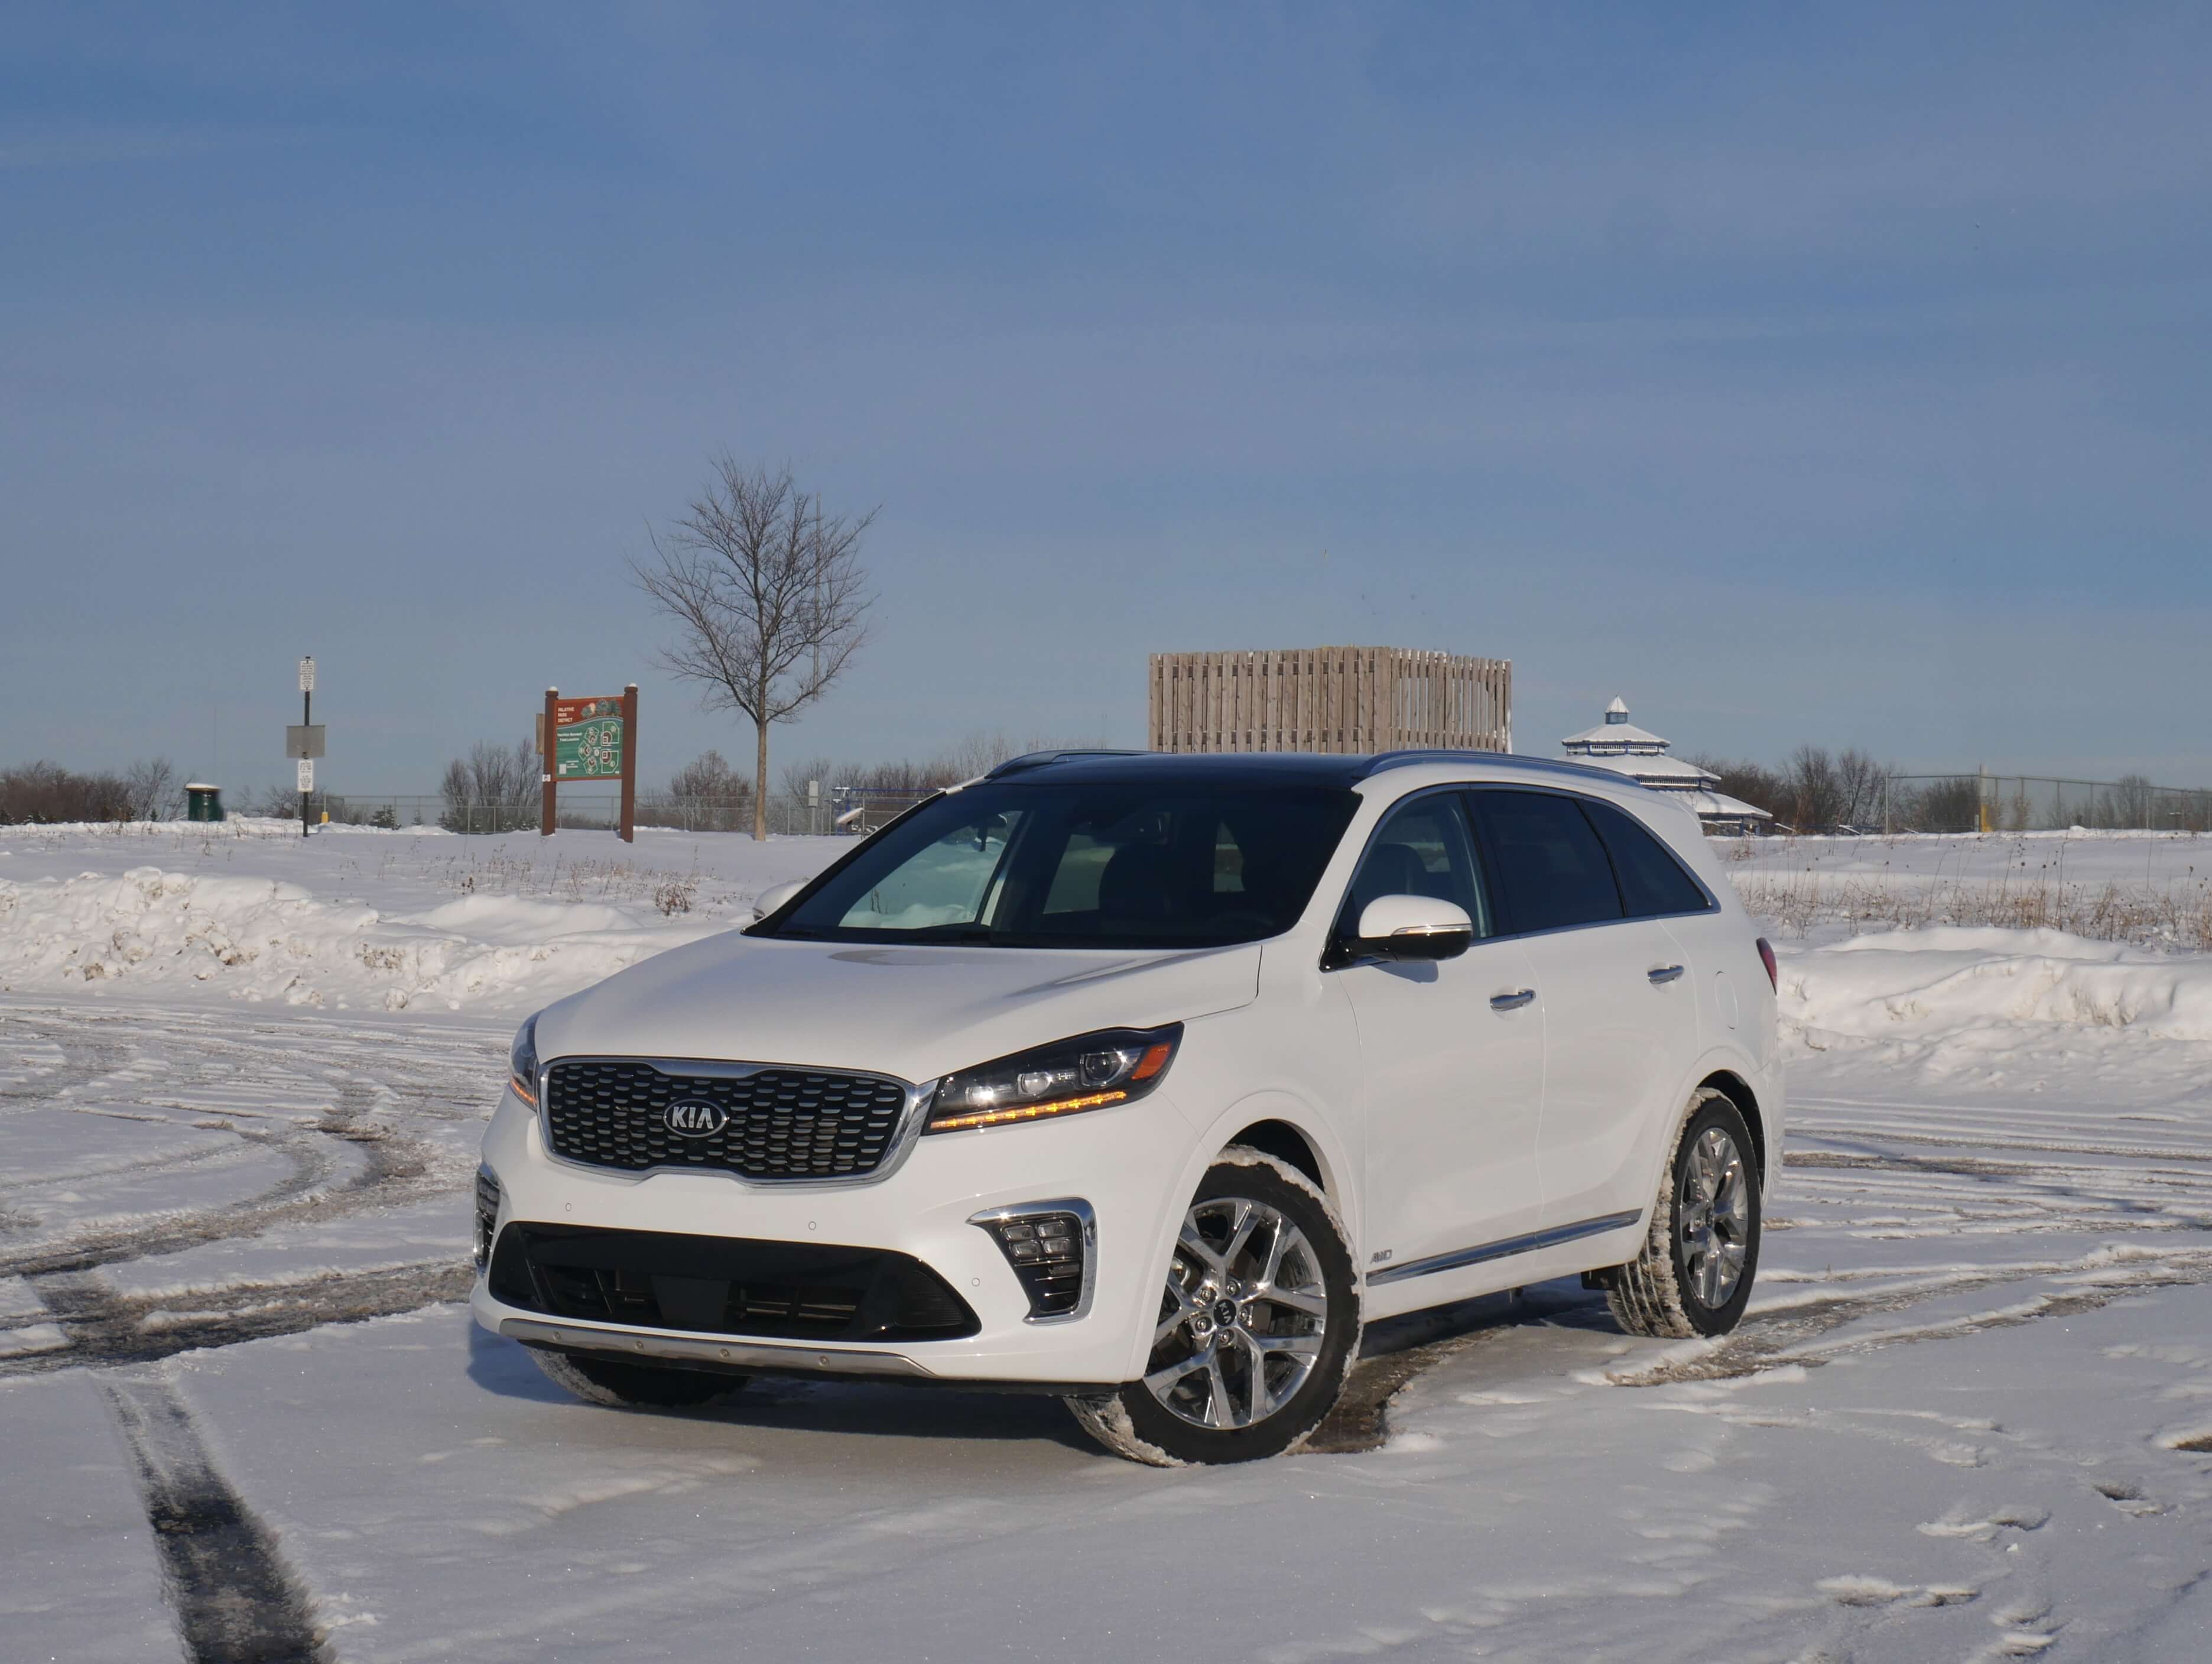 2019 Kia Sorento SXL AWD: Mid cycle updates to this very Car Like mid size crossover SUV include exclusive 3 Row configuration & tweaked exterior cues. Starting price = $27k